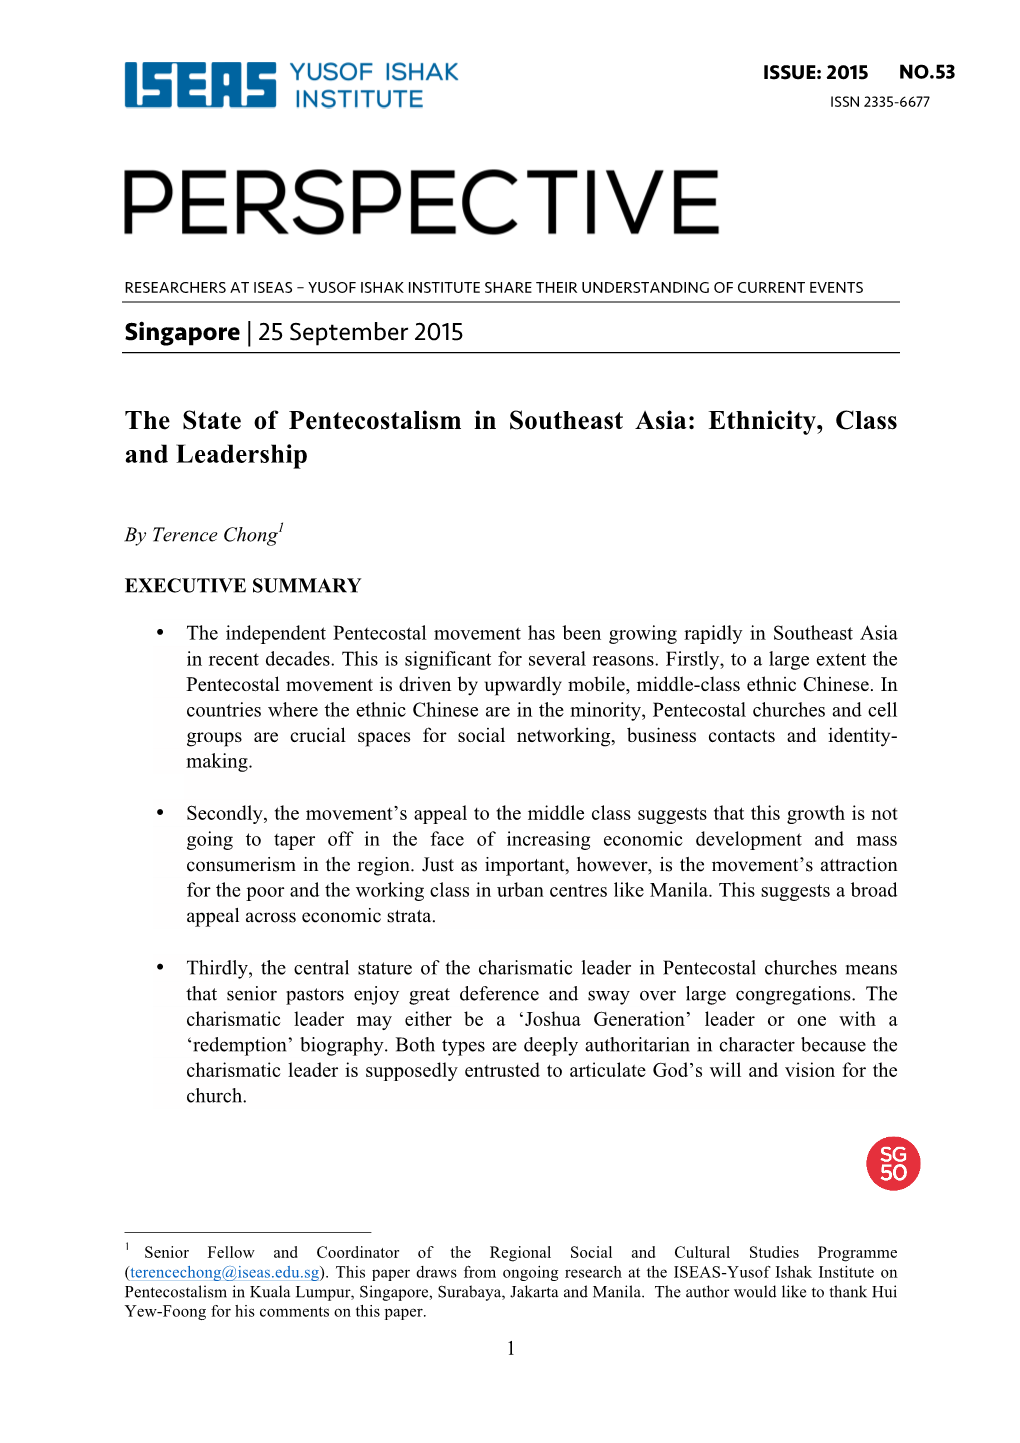 The State of Pentecostalism in Southeast Asia: Ethnicity, Class and Leadership